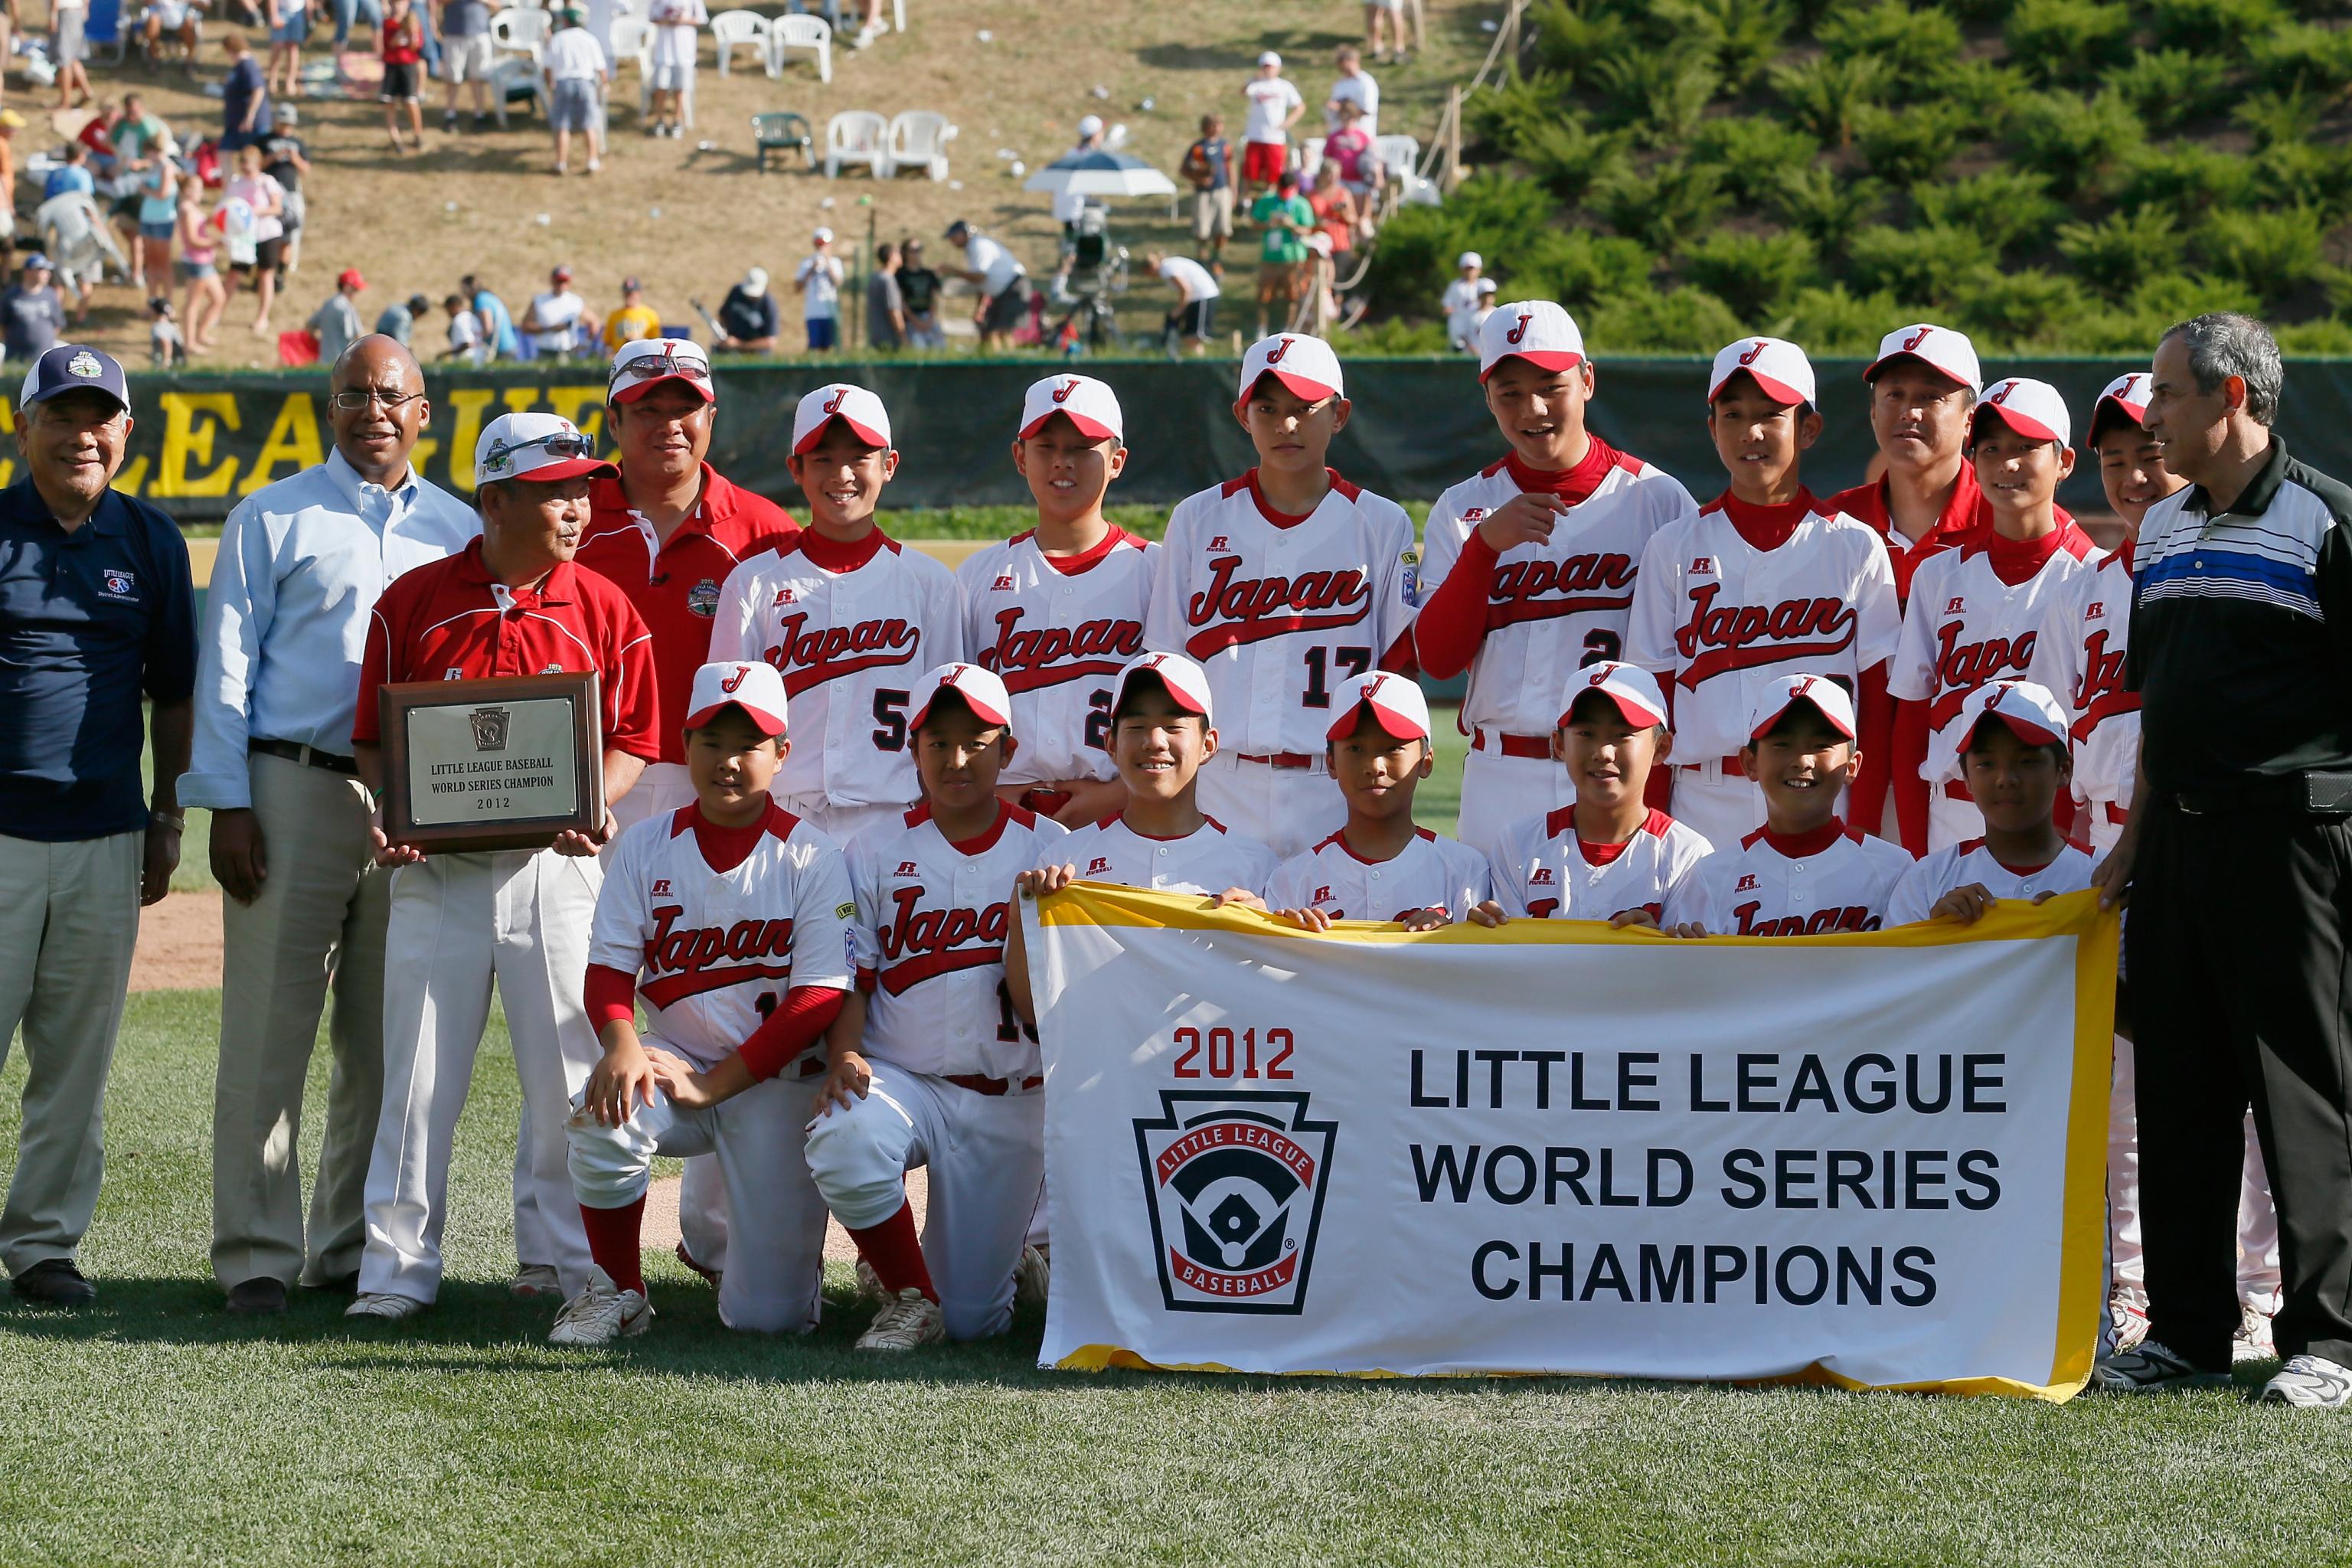 Little League World Series 2012: Japan's Victory Puts Emphasis on